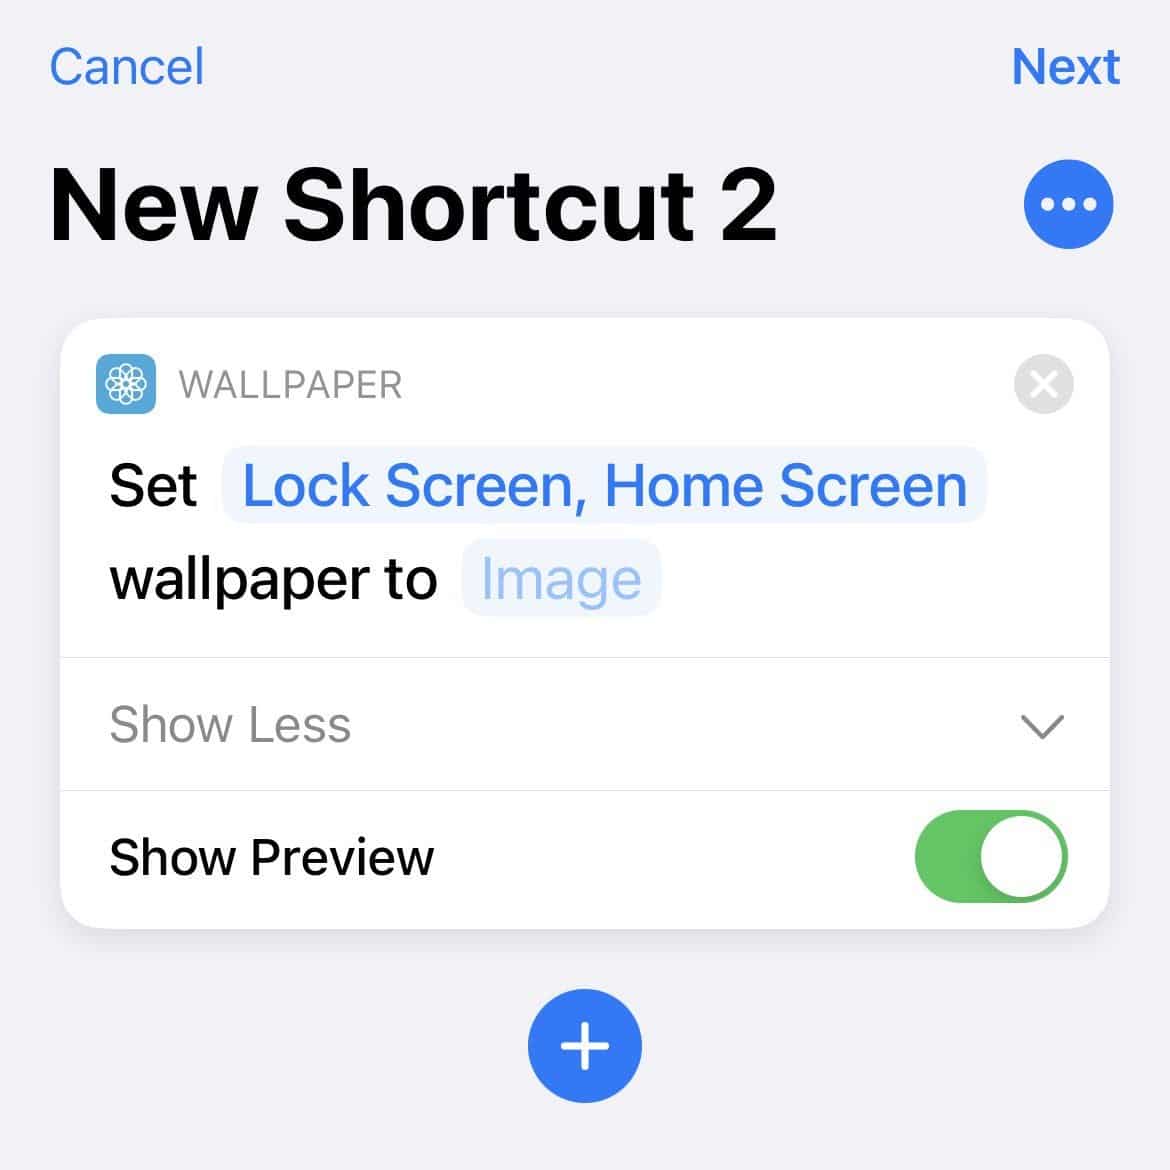 Wallpaper action in Shortcuts